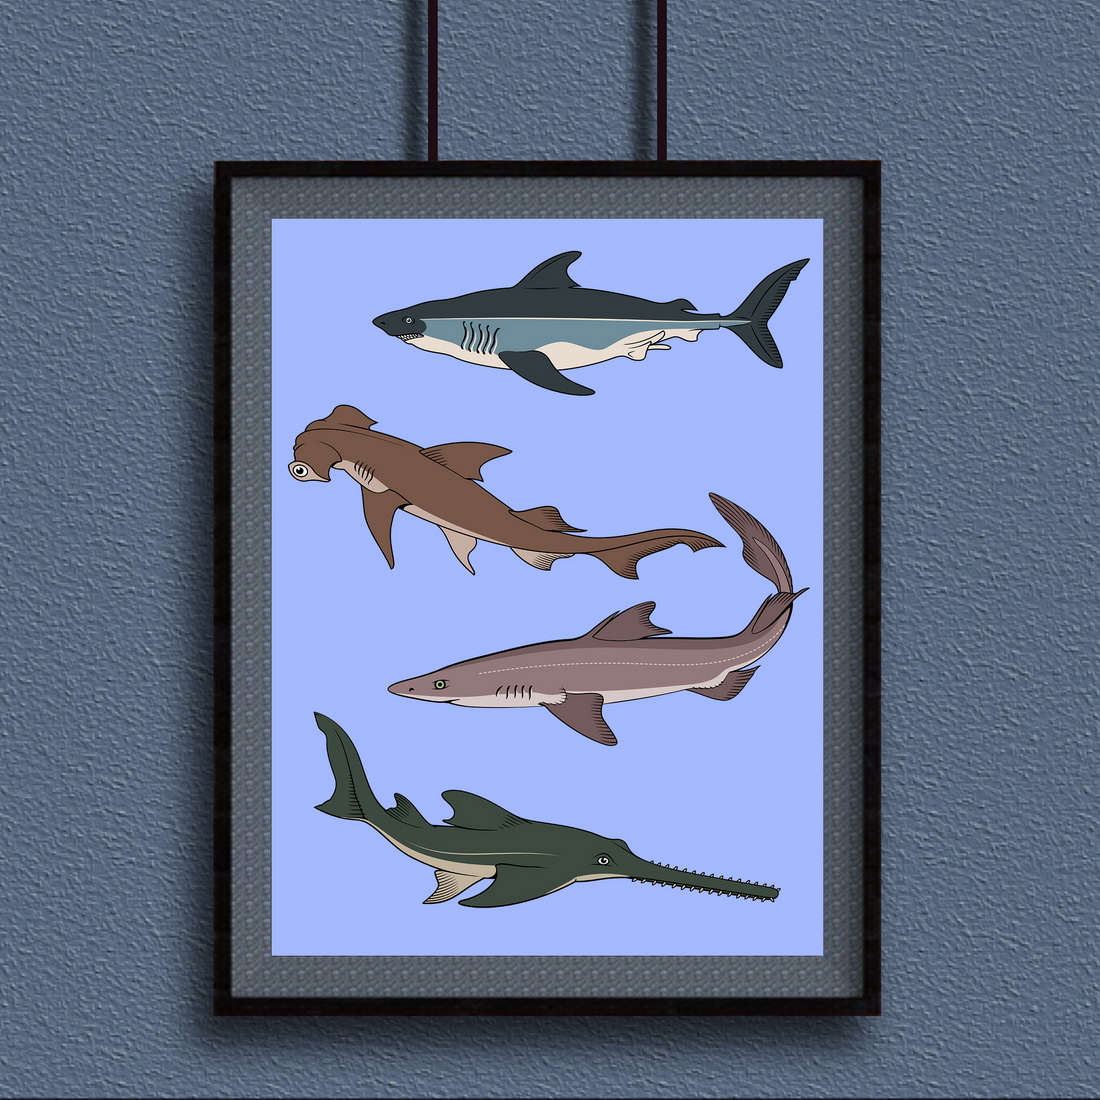 Image of a painting with 4 types of sharks.